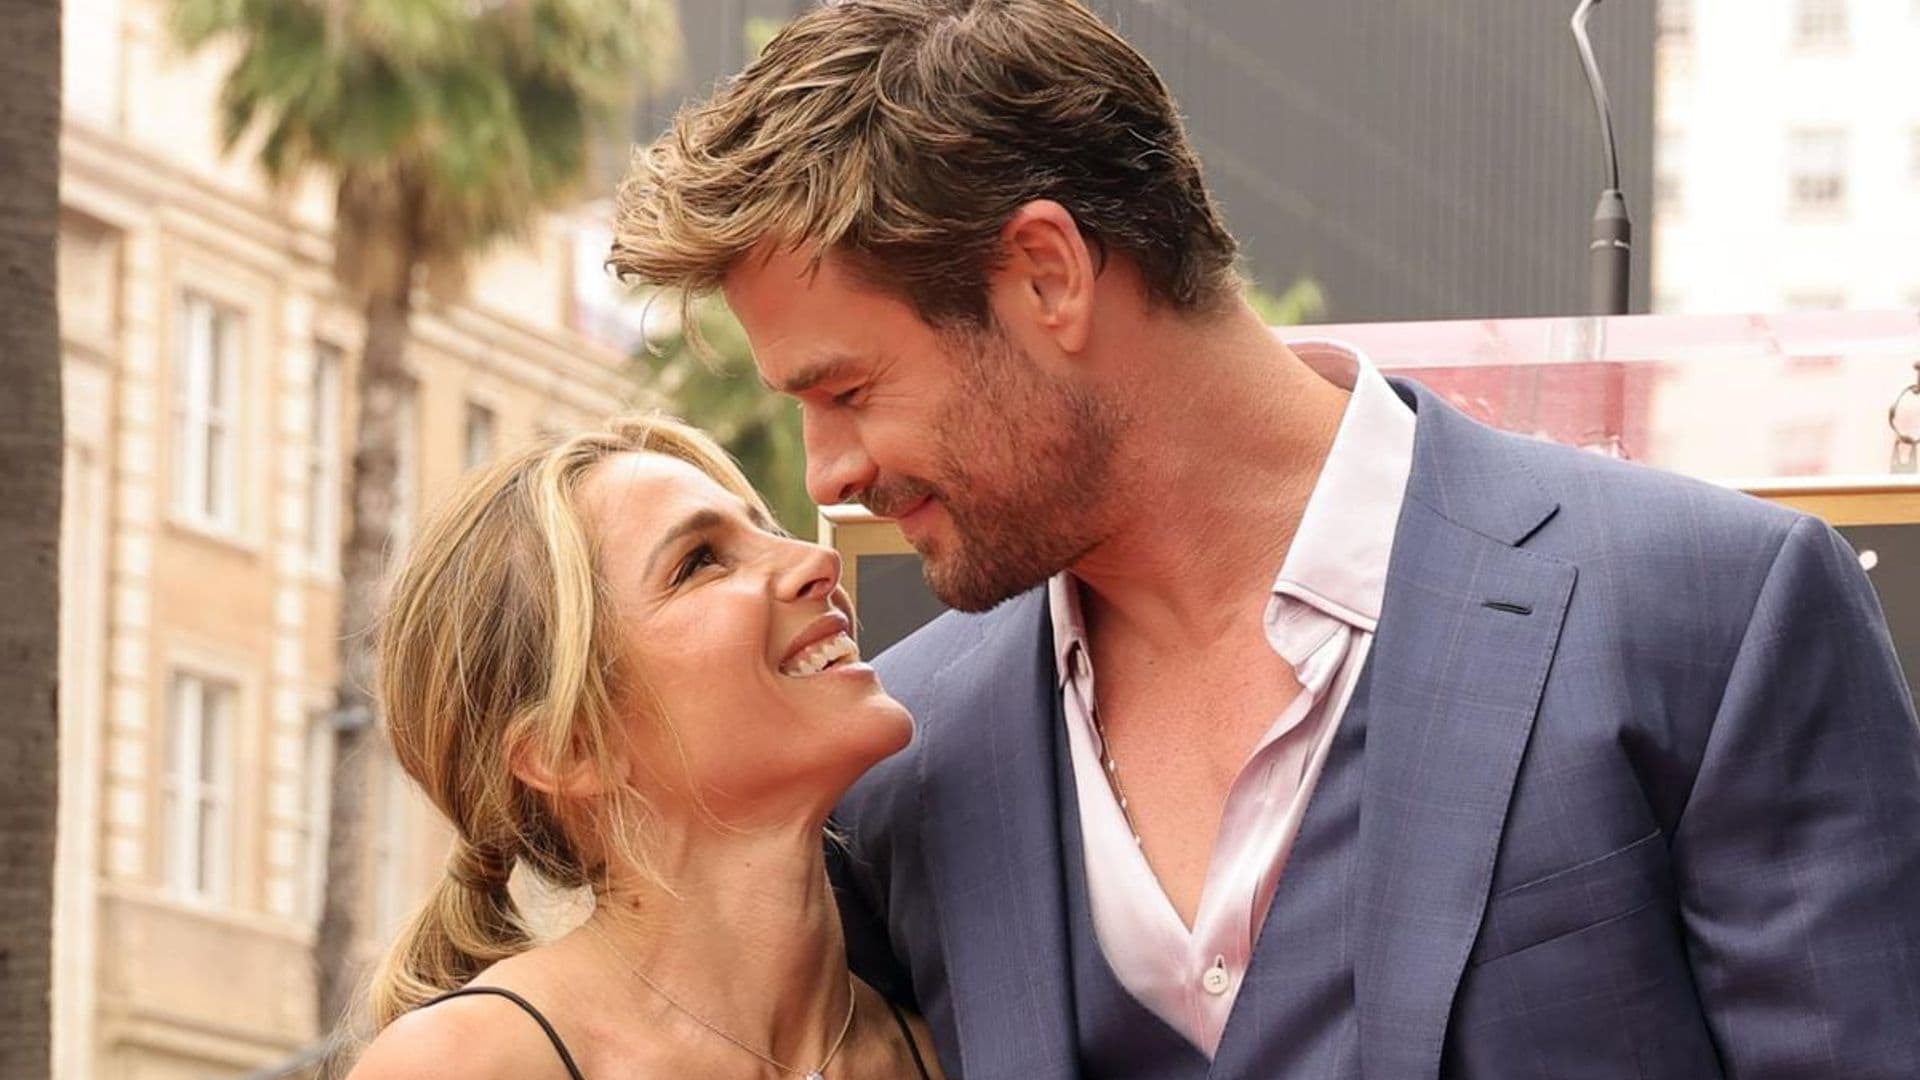 Elsa Pataky receives loving shout out from her husband Chris Hemsworth; ‘Forever in your debt’